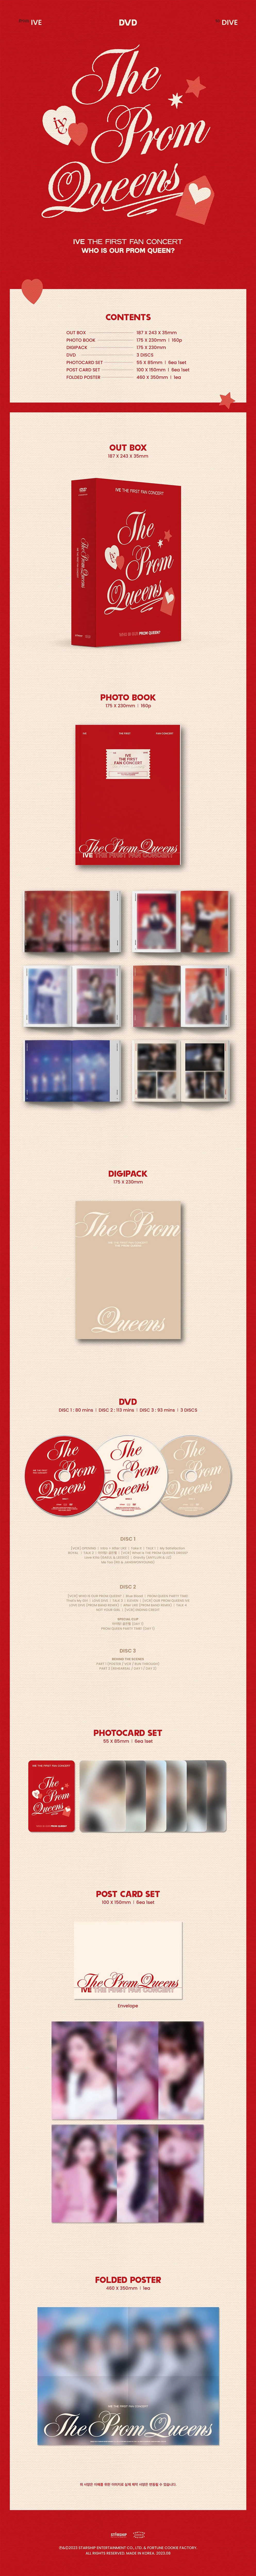 IVE - THE FIRST FAN CONCERT [The Prom Queens] DVD